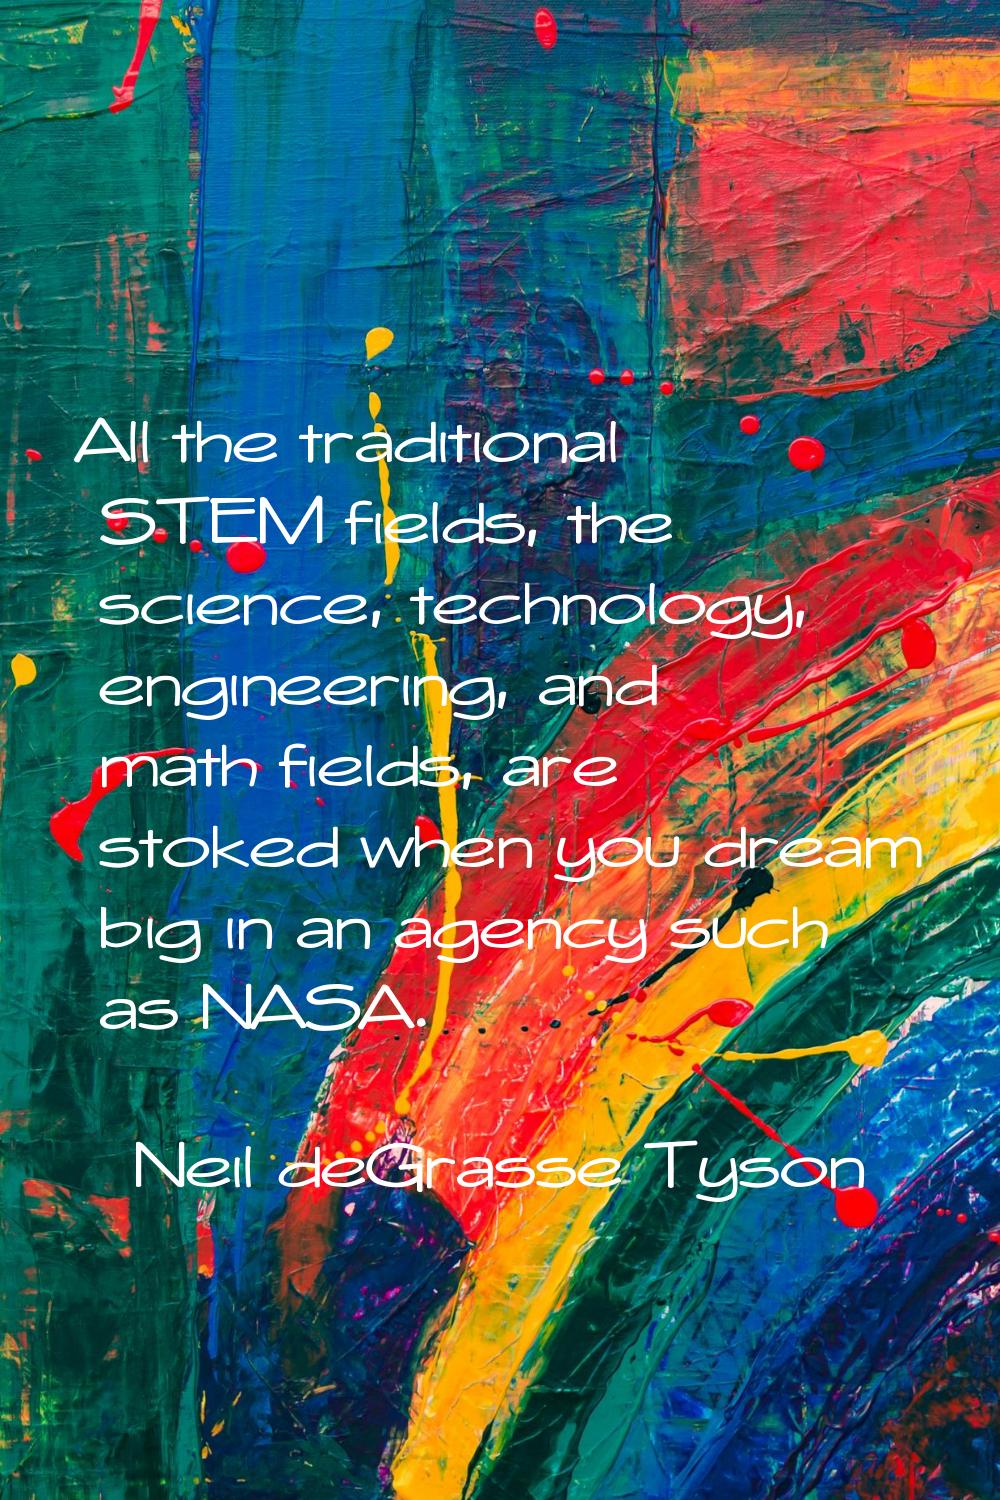 All the traditional STEM fields, the science, technology, engineering, and math fields, are stoked 